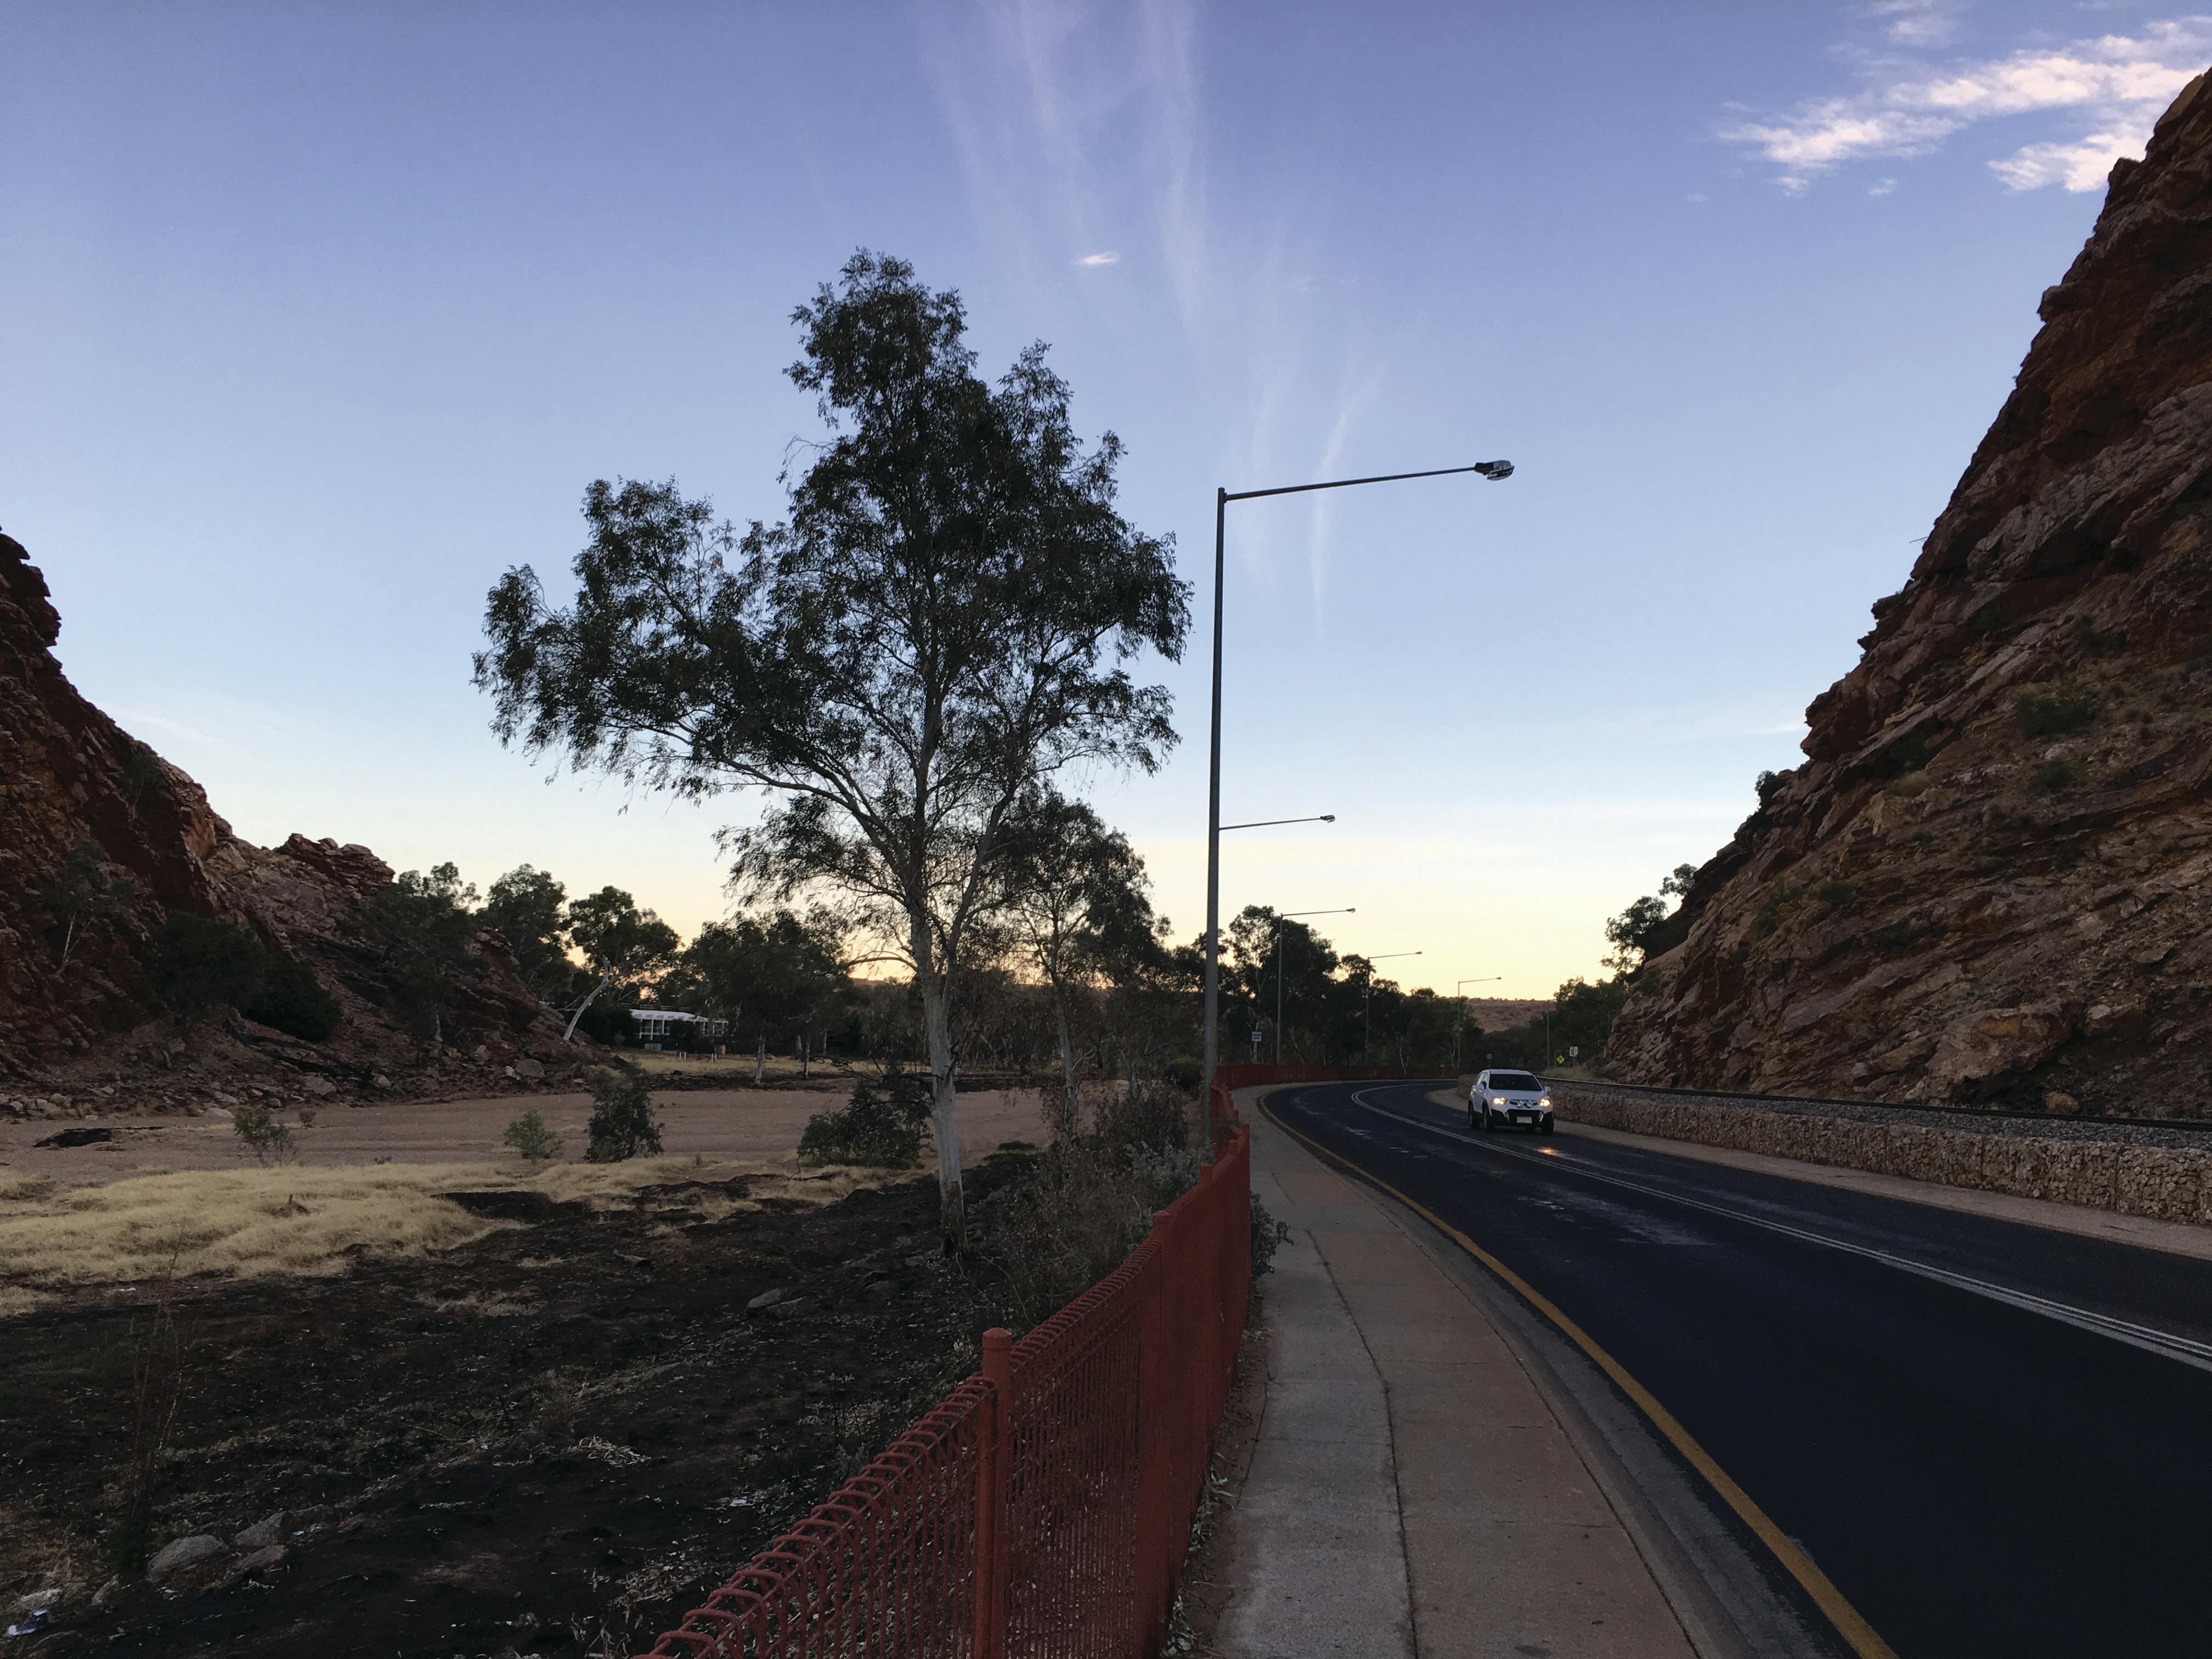 Twilight at The Gap (Ntaripe) showing shared path, road and river bed